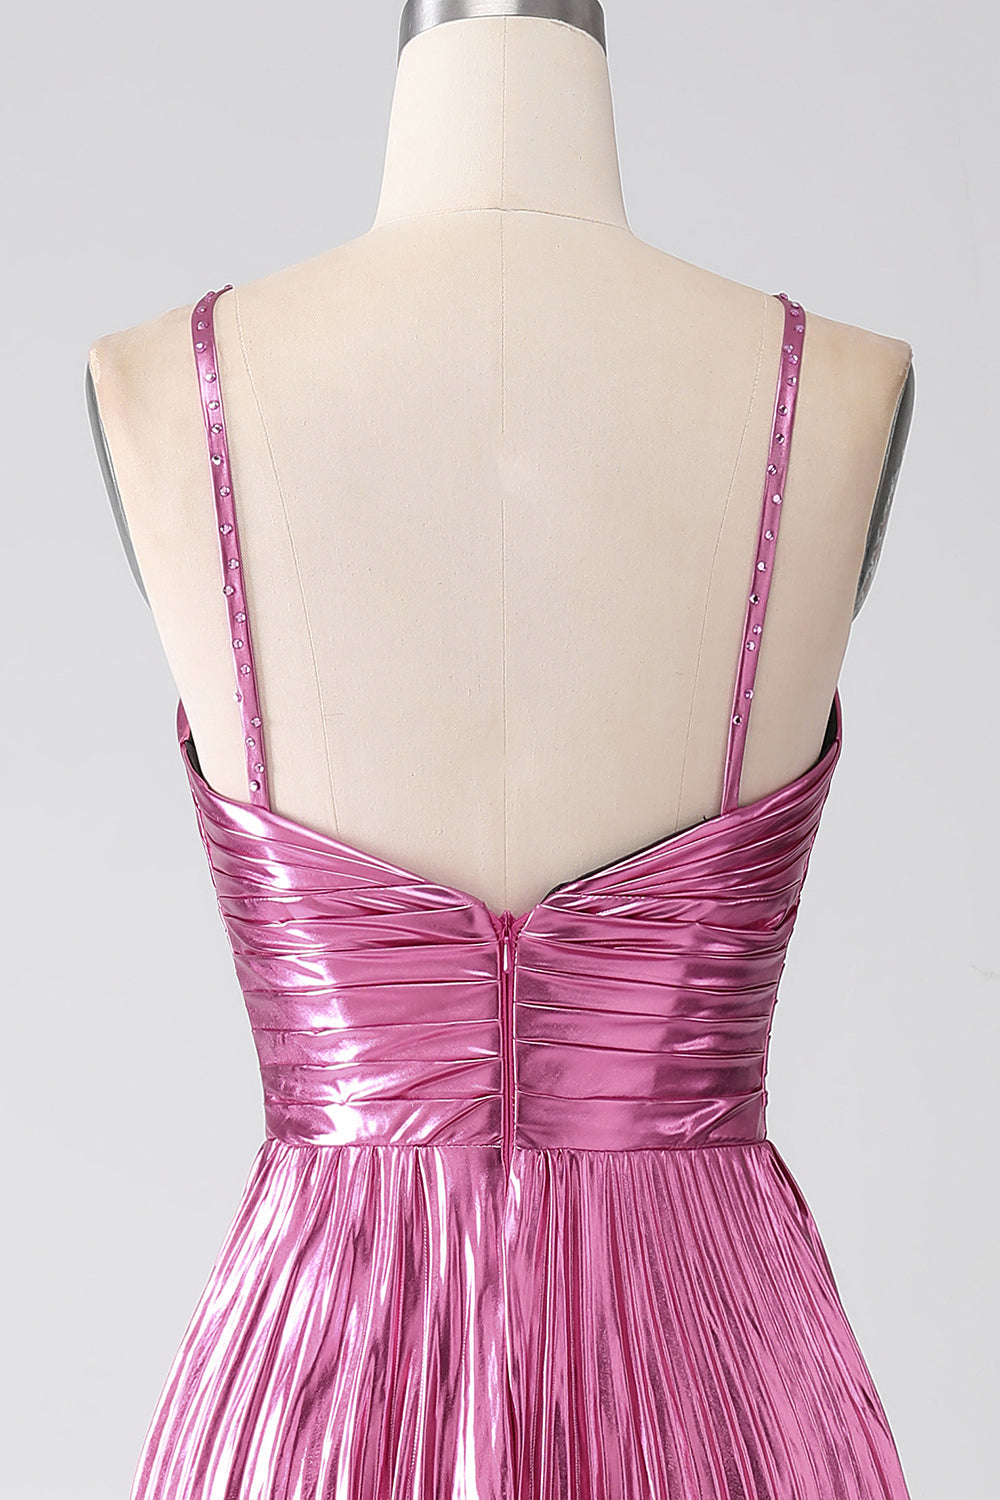 Fuchsia A-Line Spaghetti Straps Pleated Sparkly Prom Dress with Slit